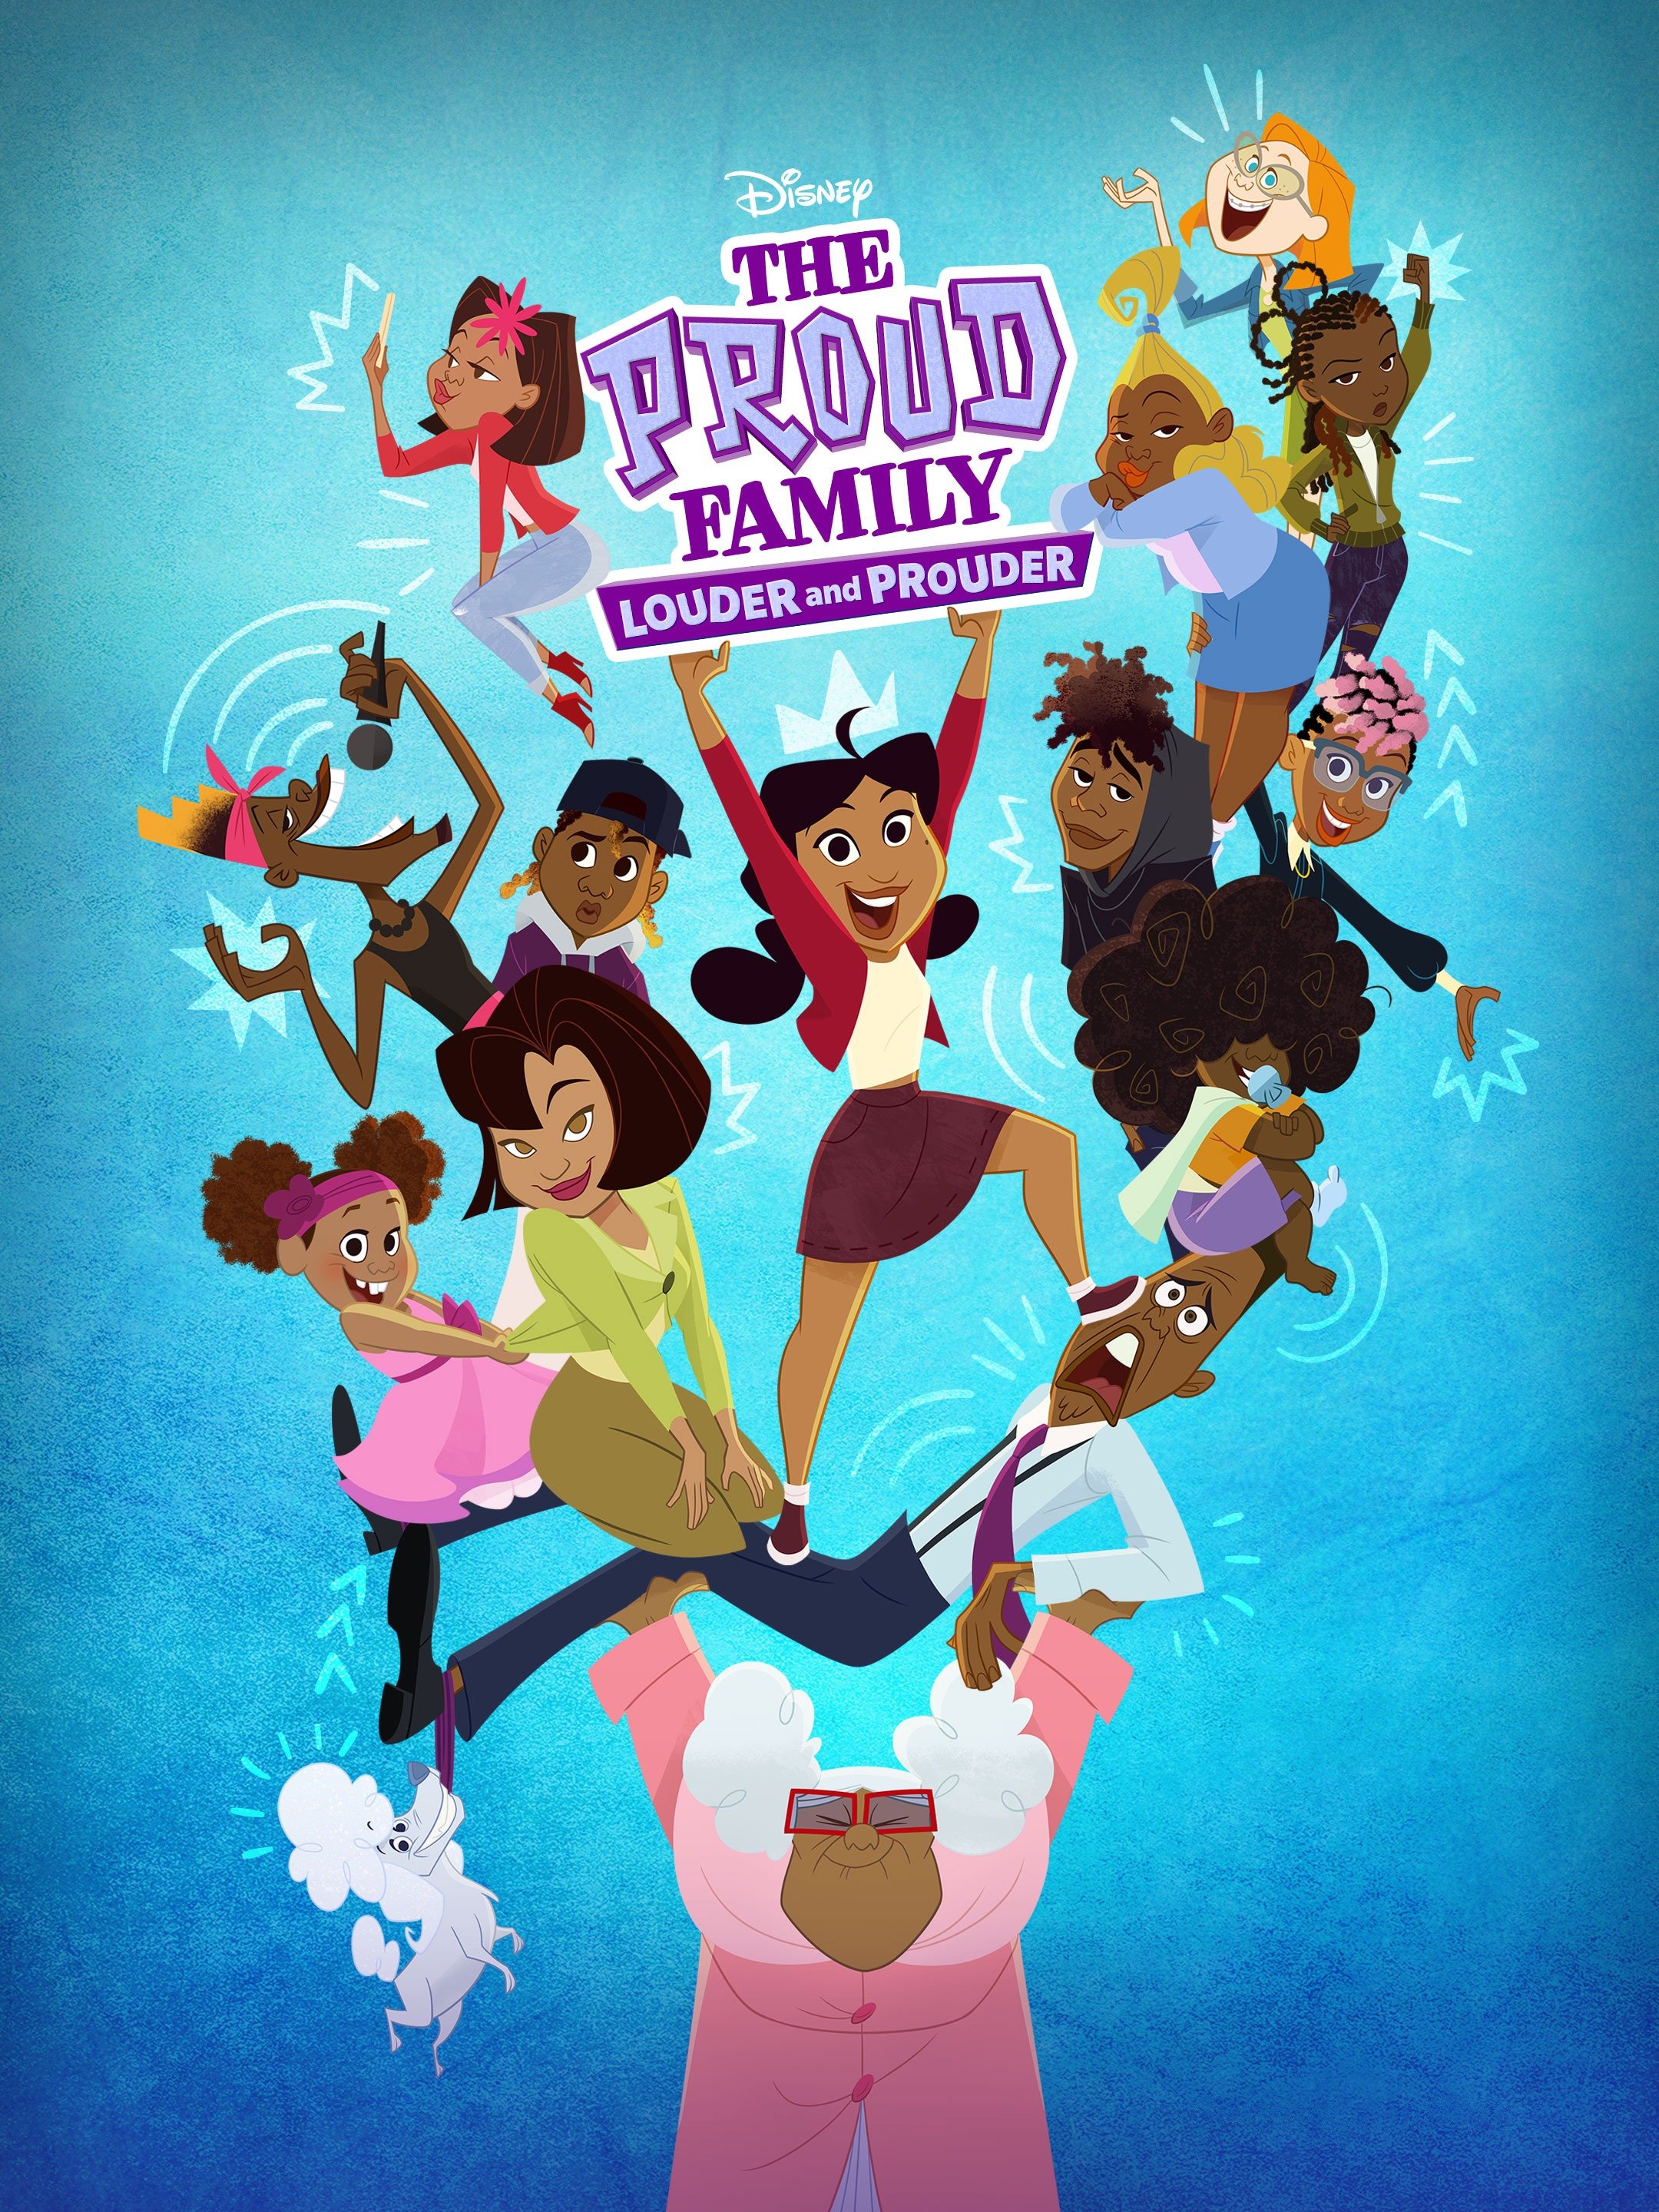 The Proud Family: Louder and Prouder - Trailers & Videos - Rotten Tomatoes